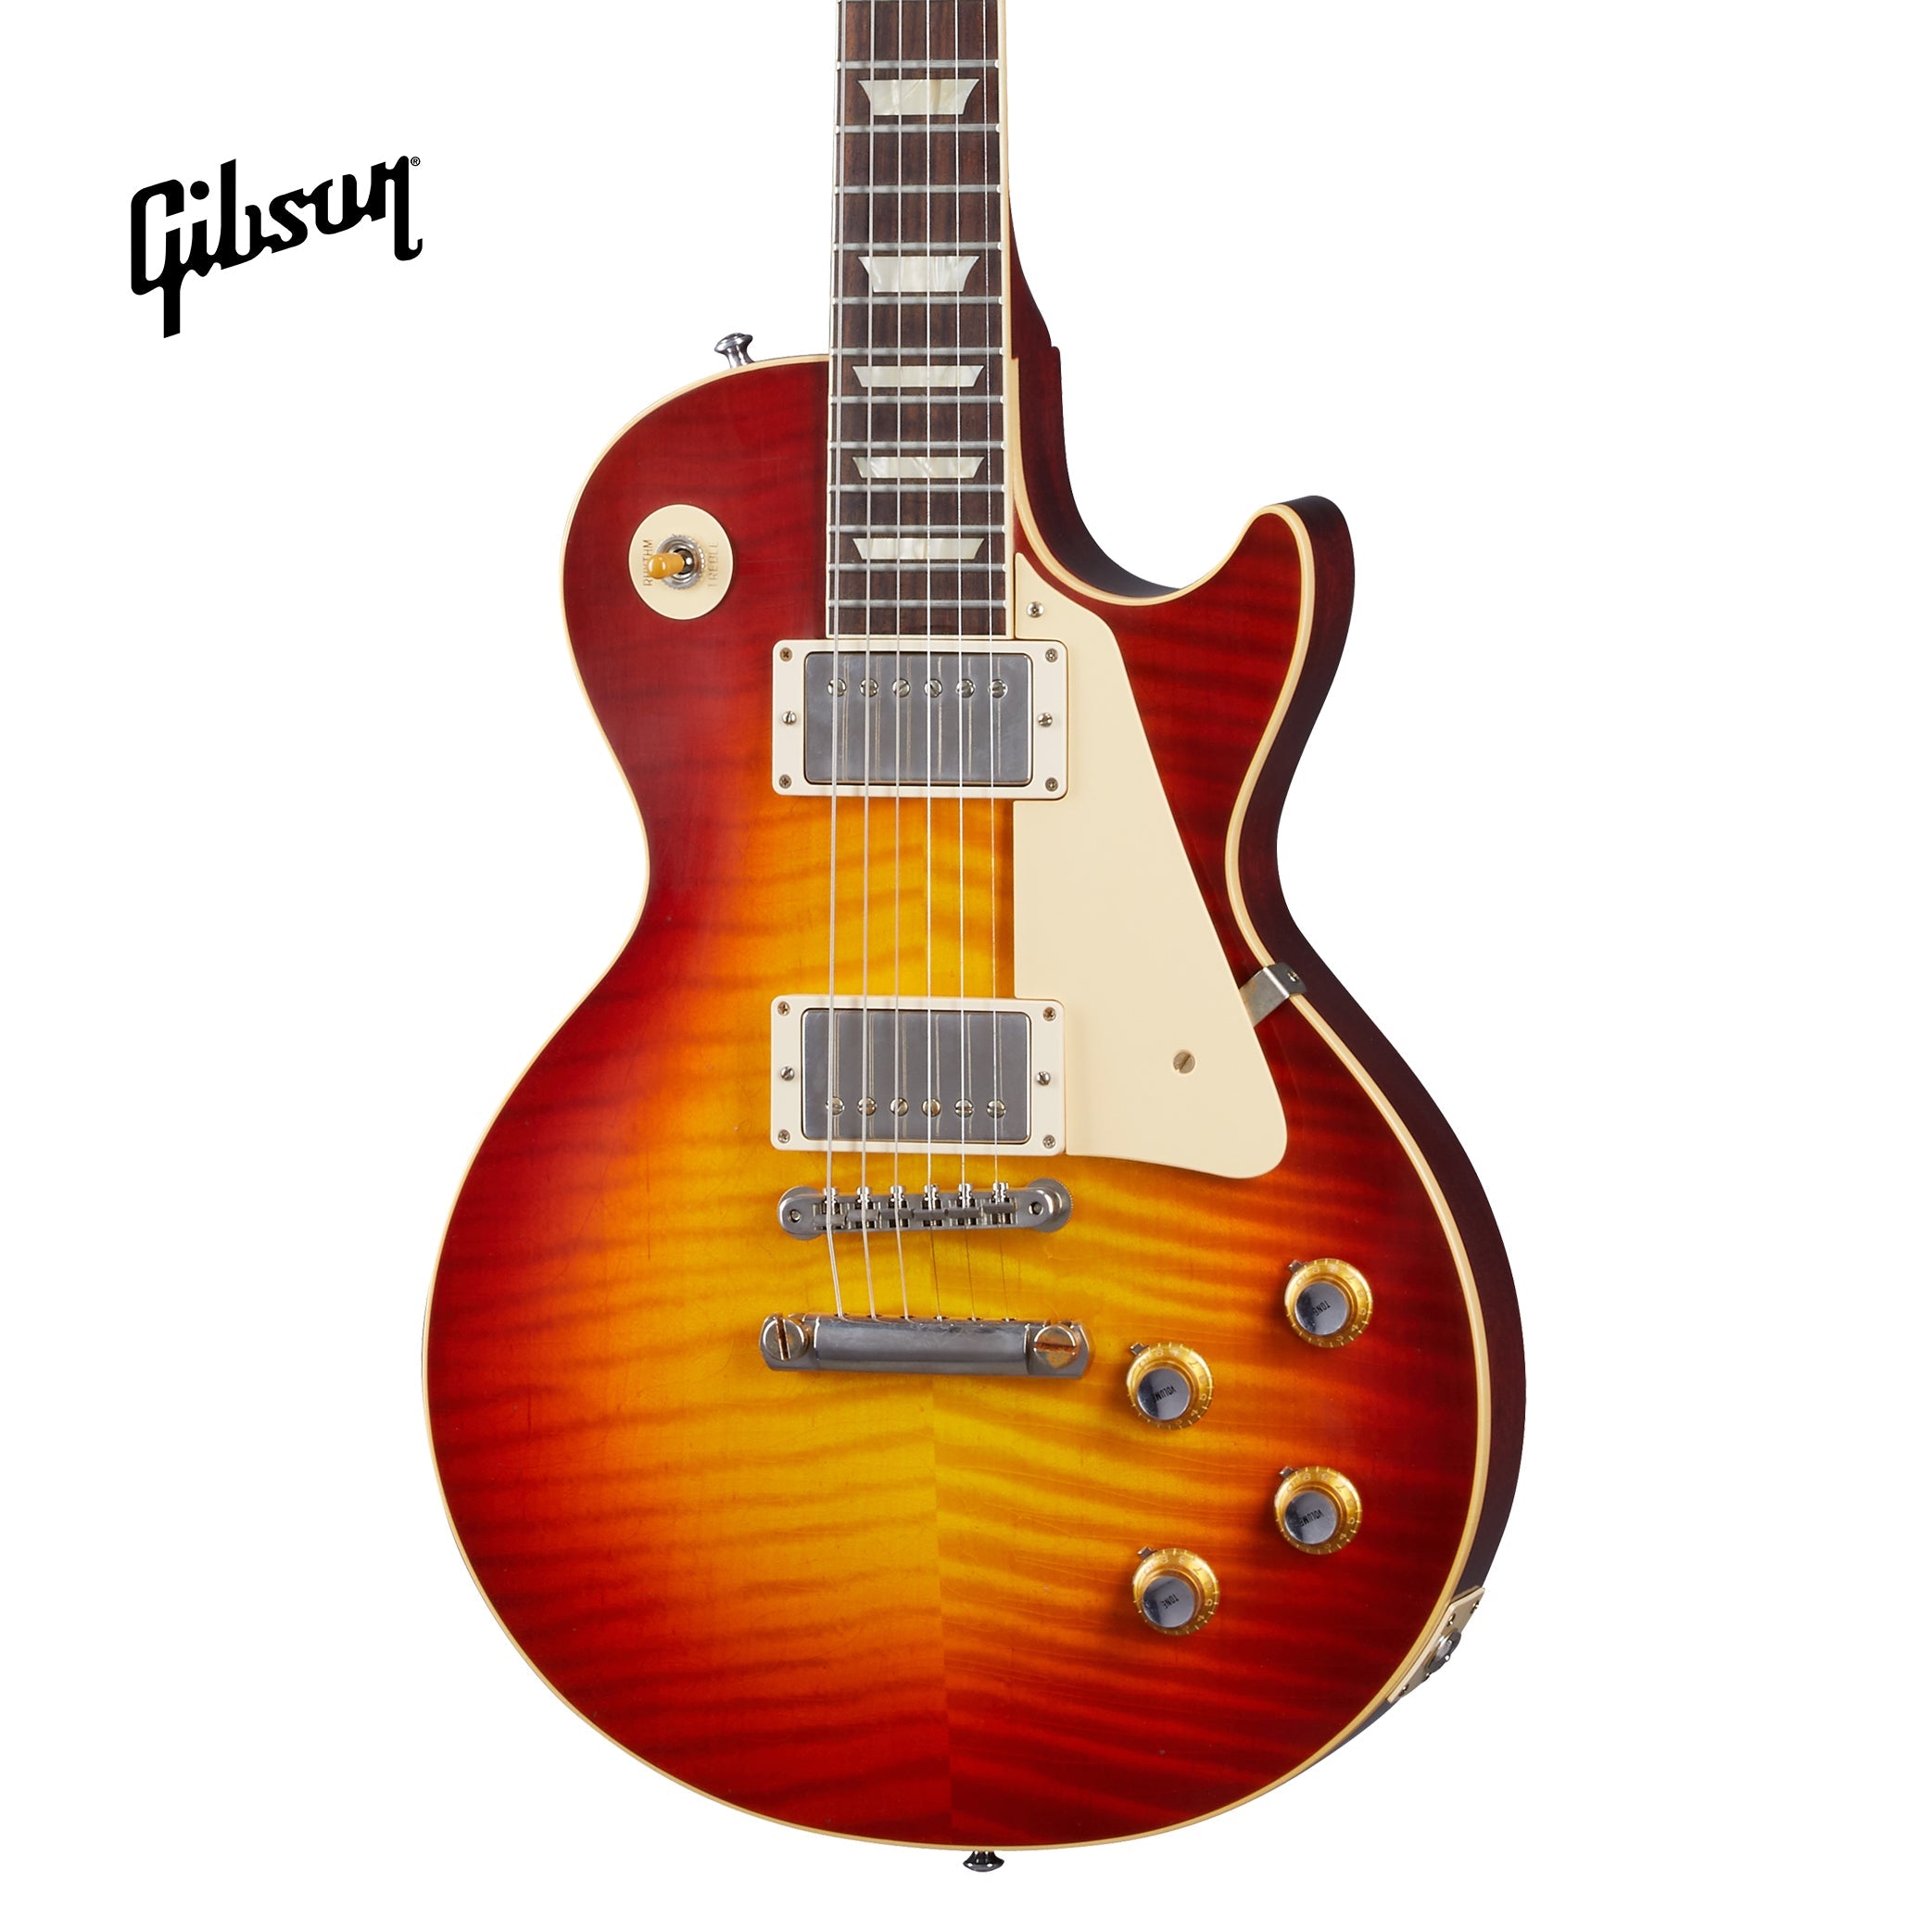 GIBSON 1960 LES PAUL STANDARD REISSUE ULTRA LIGHT AGED ELECTRIC GUITAR - WIDE TOMATO BURST